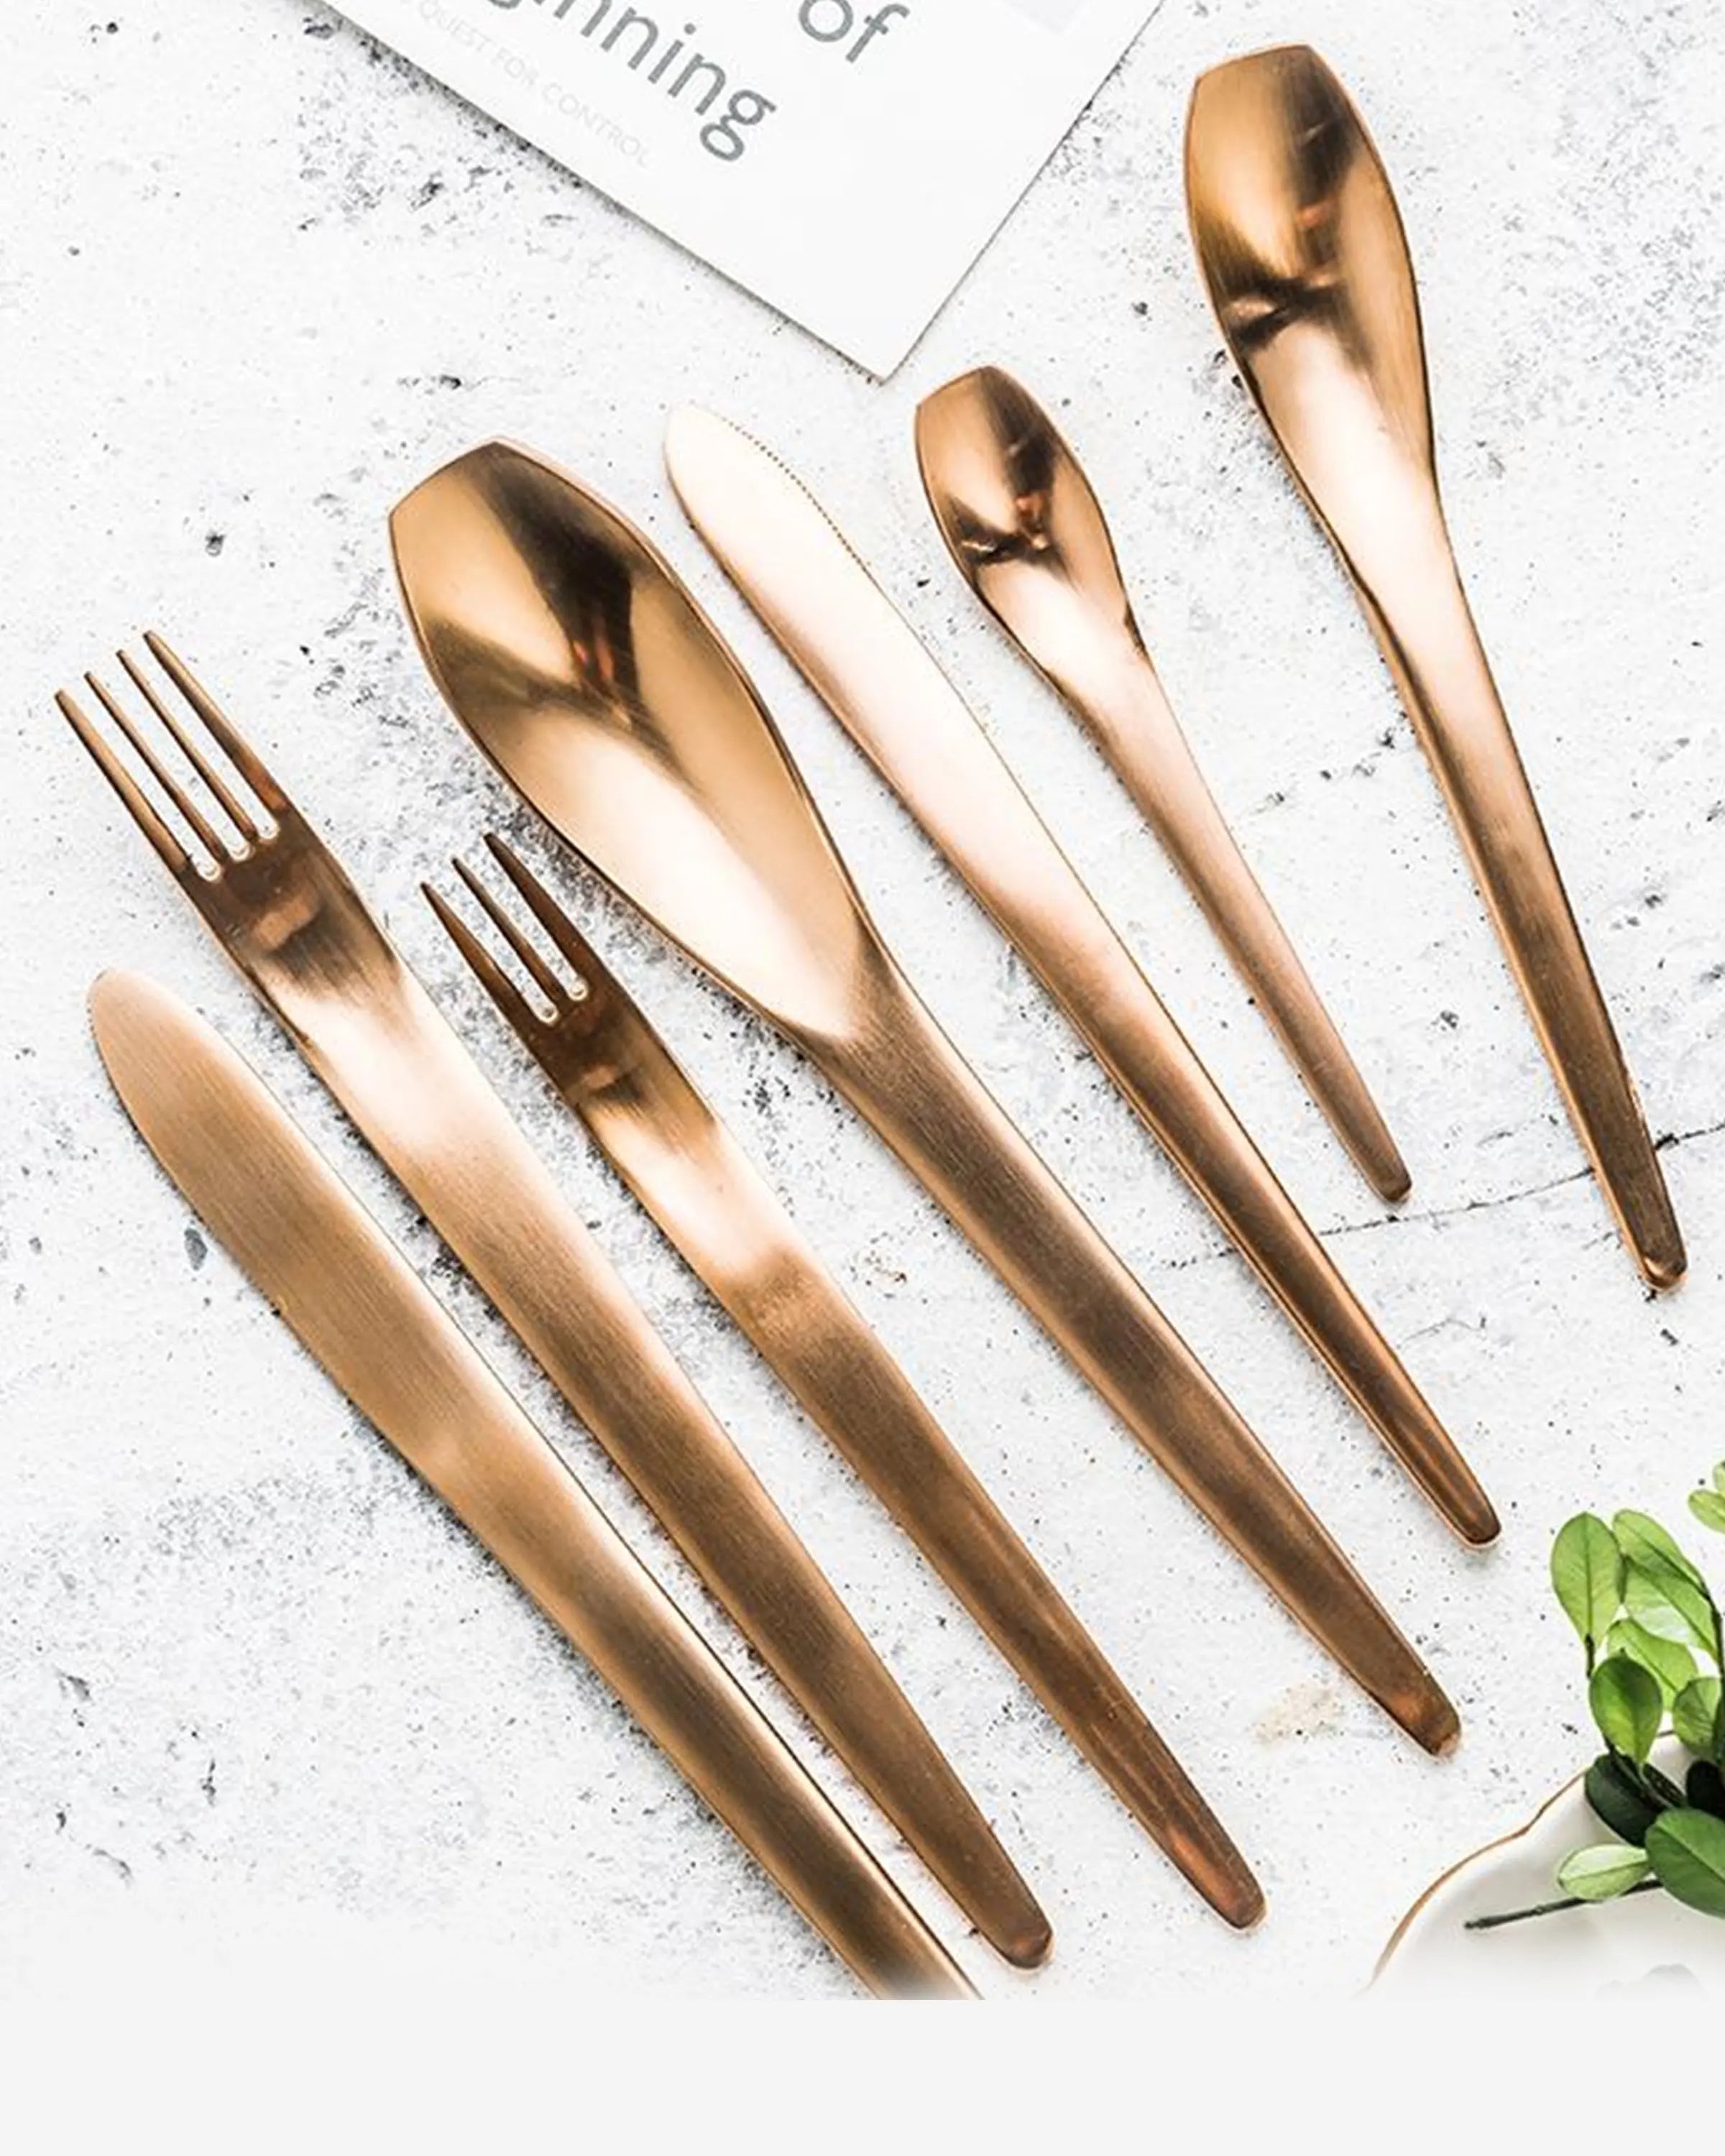 Berli Mate Rose Gold & Black Cutlery ANGIE HOMES